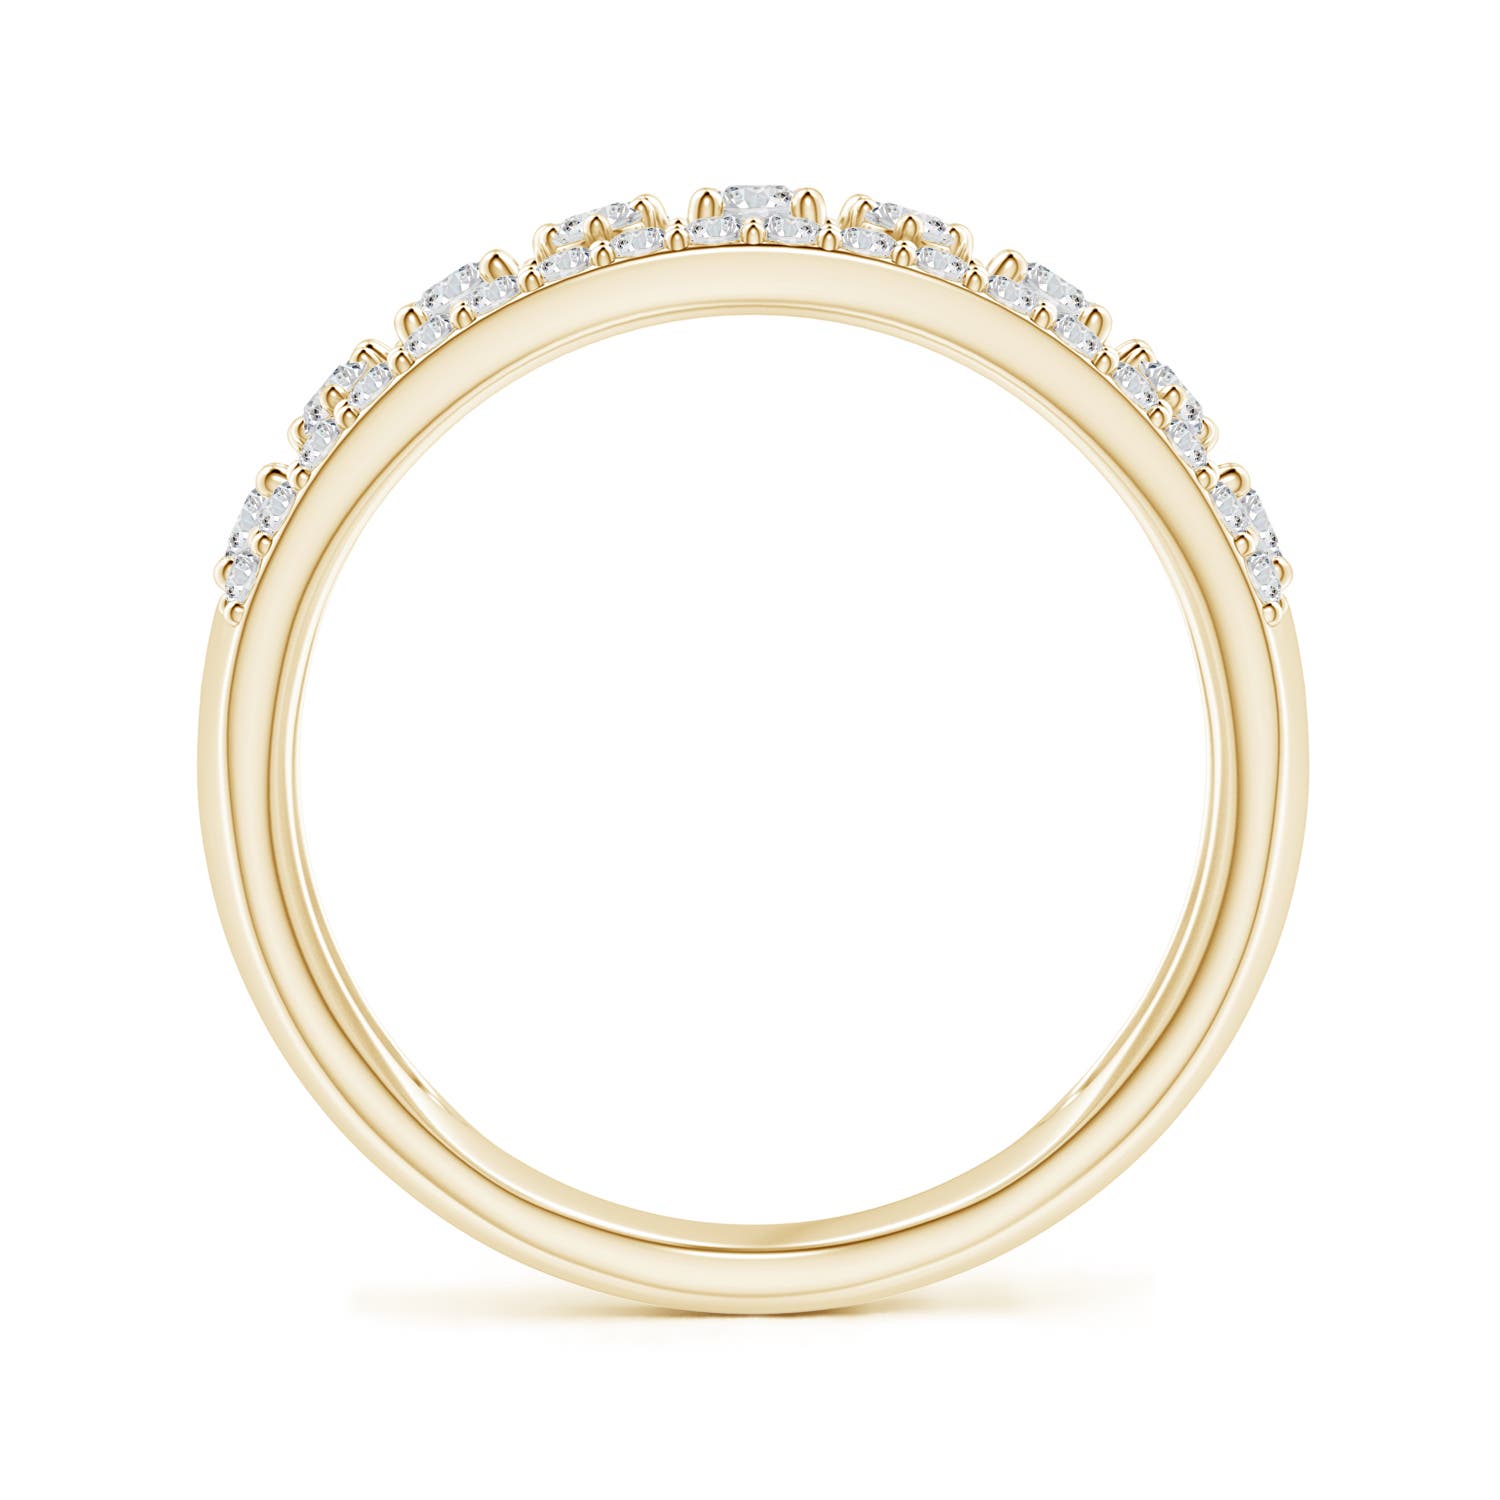 H, SI2 / 1.19 CT / 14 KT Yellow Gold